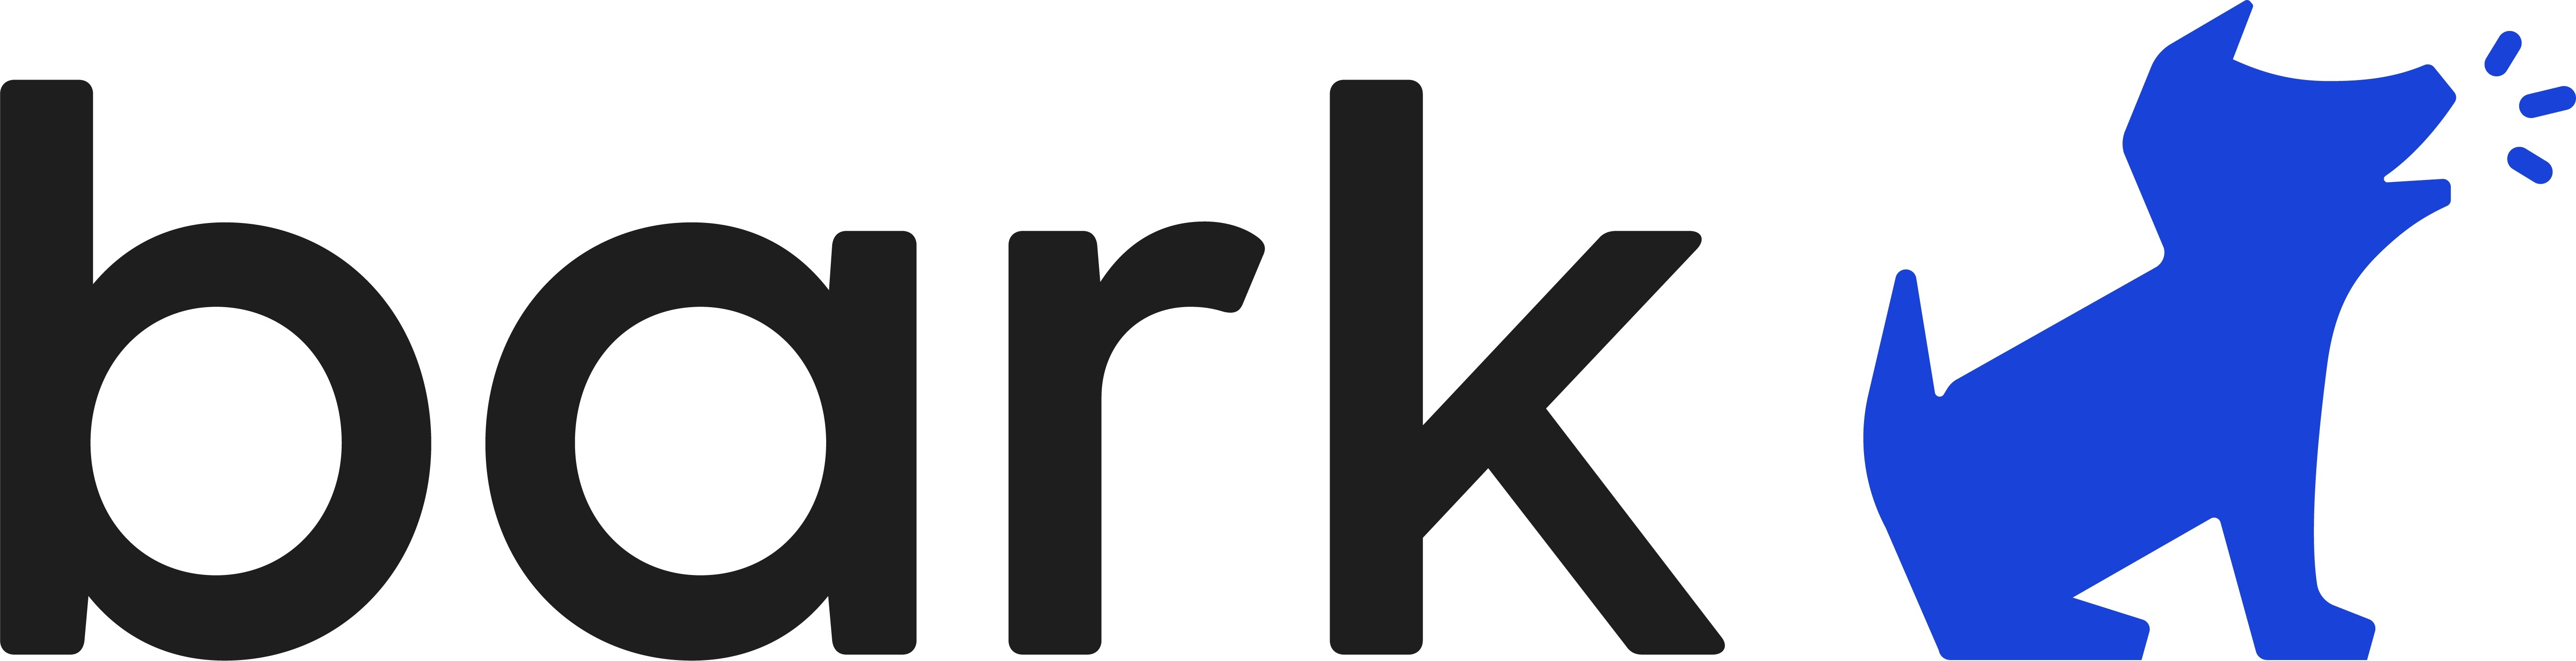 Bark Technologies Announces a Strategic MVNO Agreement with T-Mobile Enabling Mobile Service for its Bark Phone Featuring Children's Online Protection